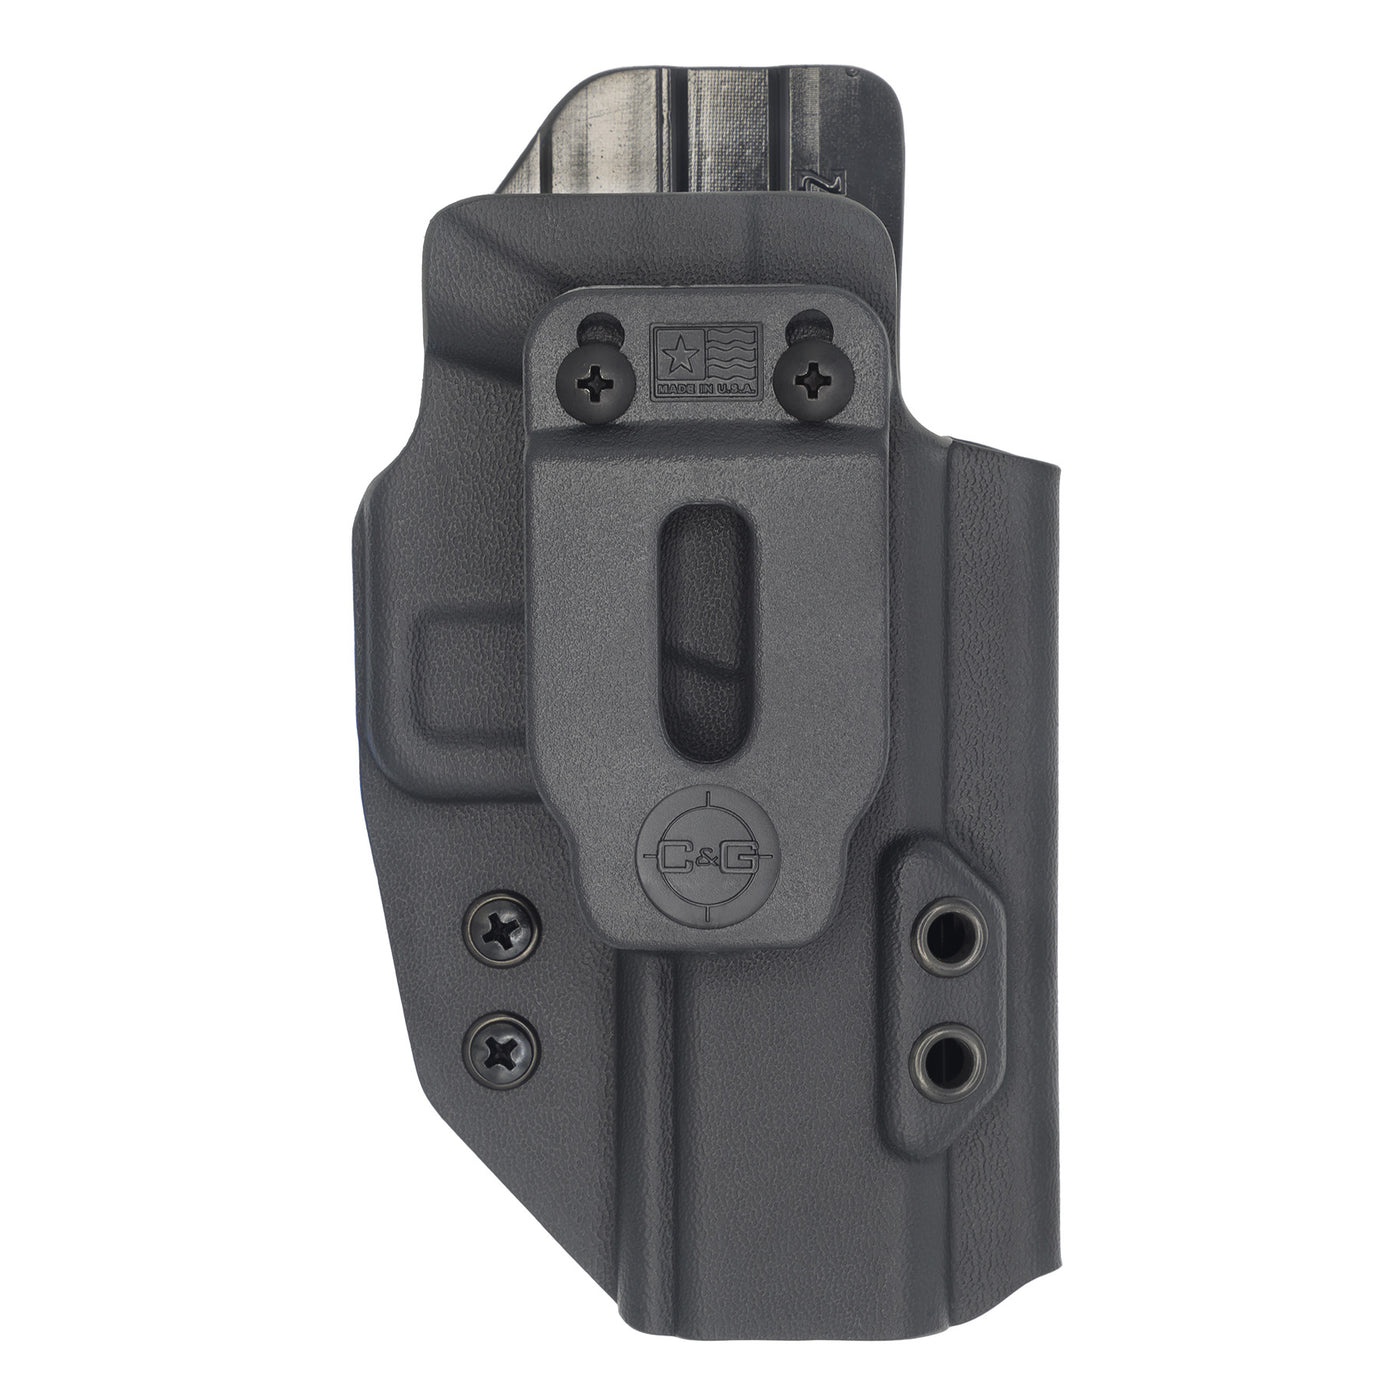 ZEV Technologies OZ9c in a C&G Holsters Inside the waistband Covert holster in right hand.